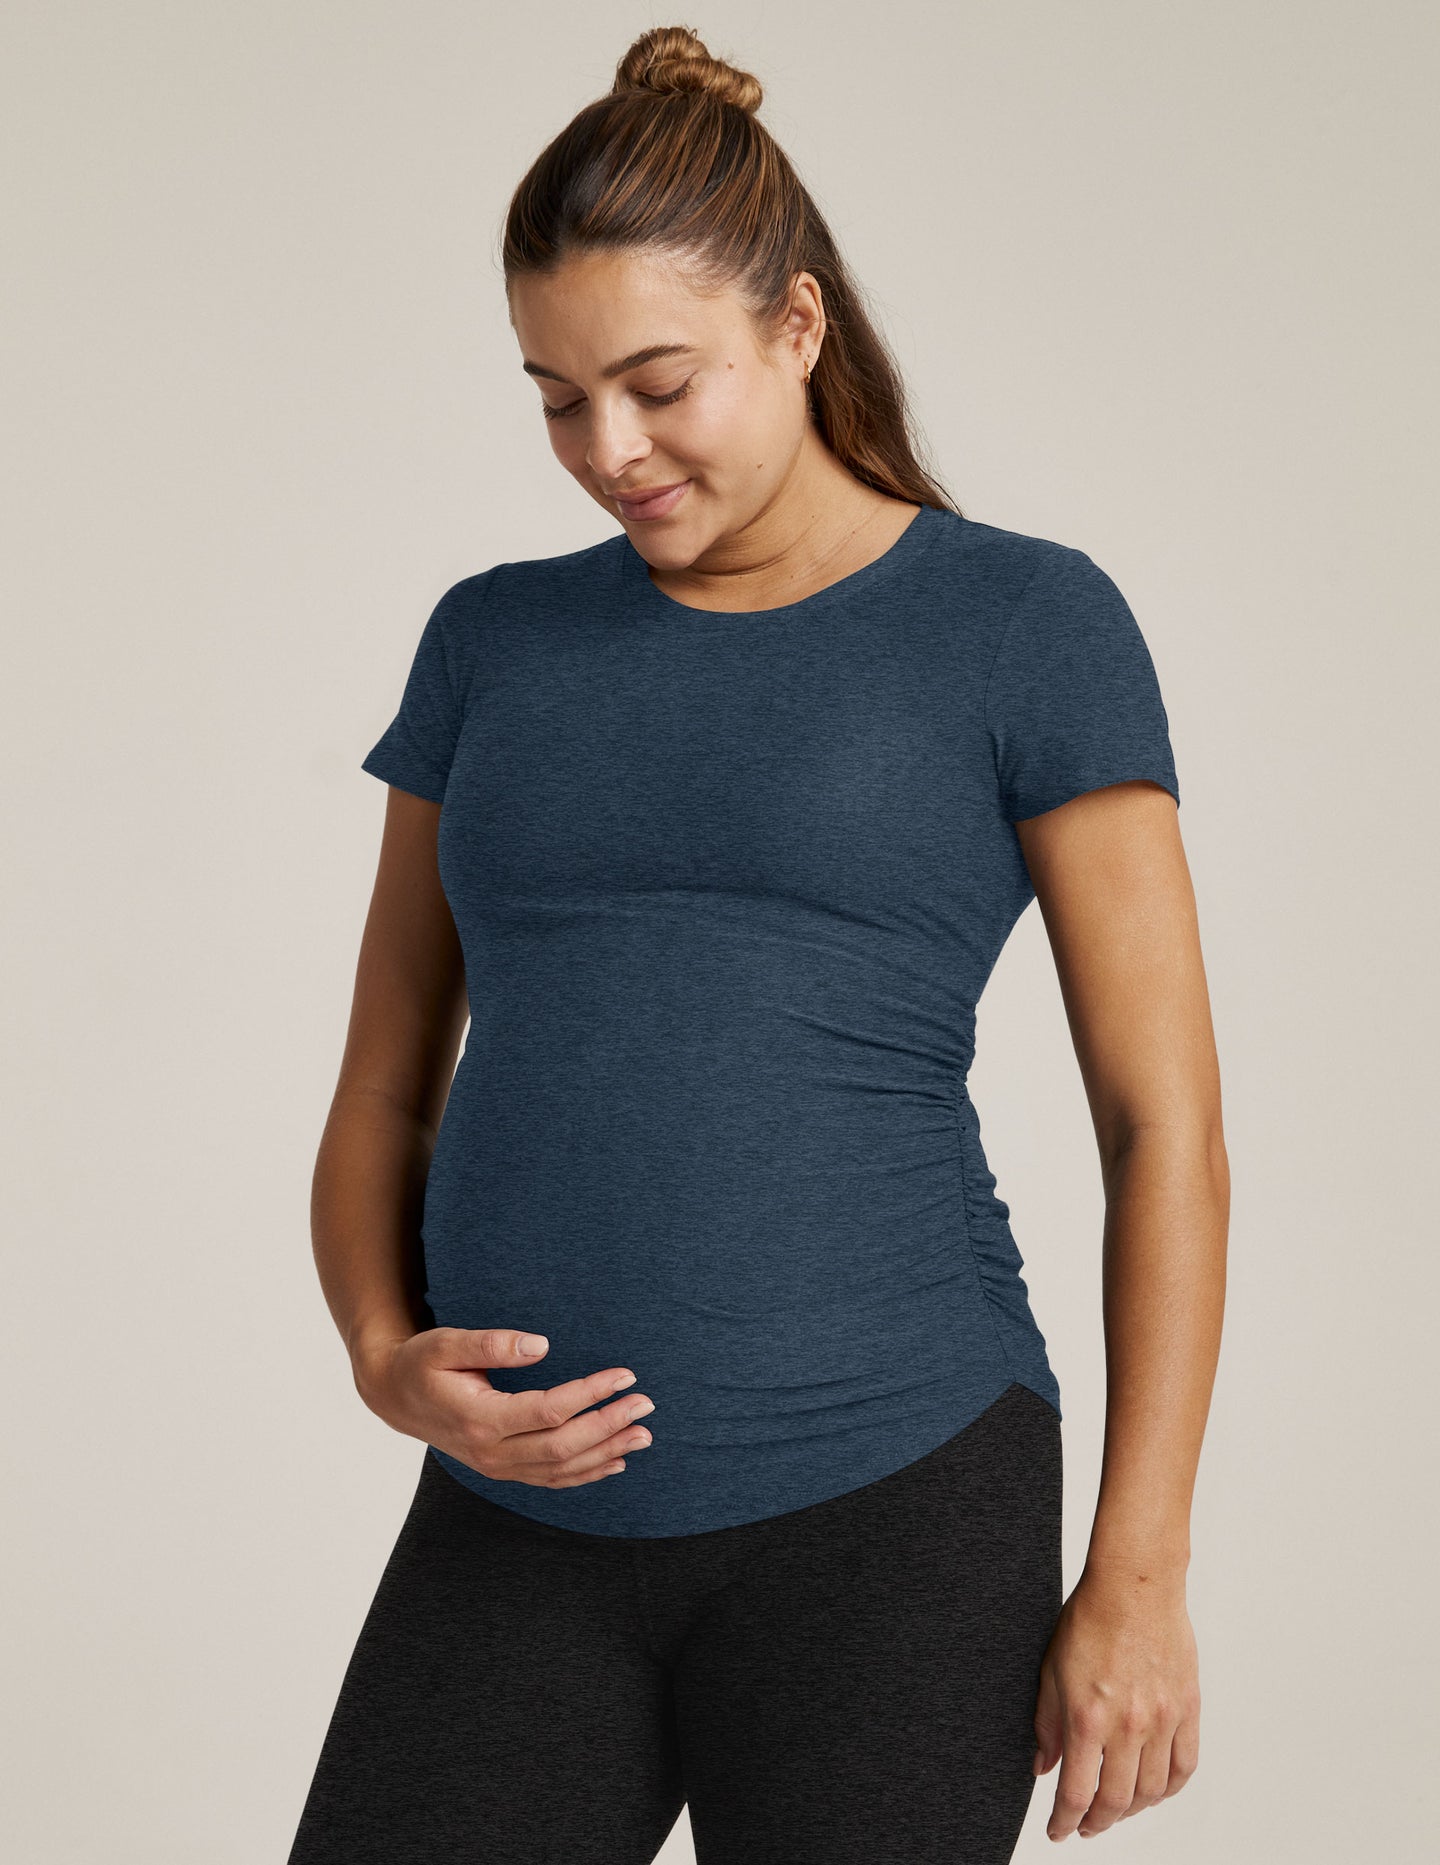 Featherweight One & Only Maternity Tee | Beyond Yoga